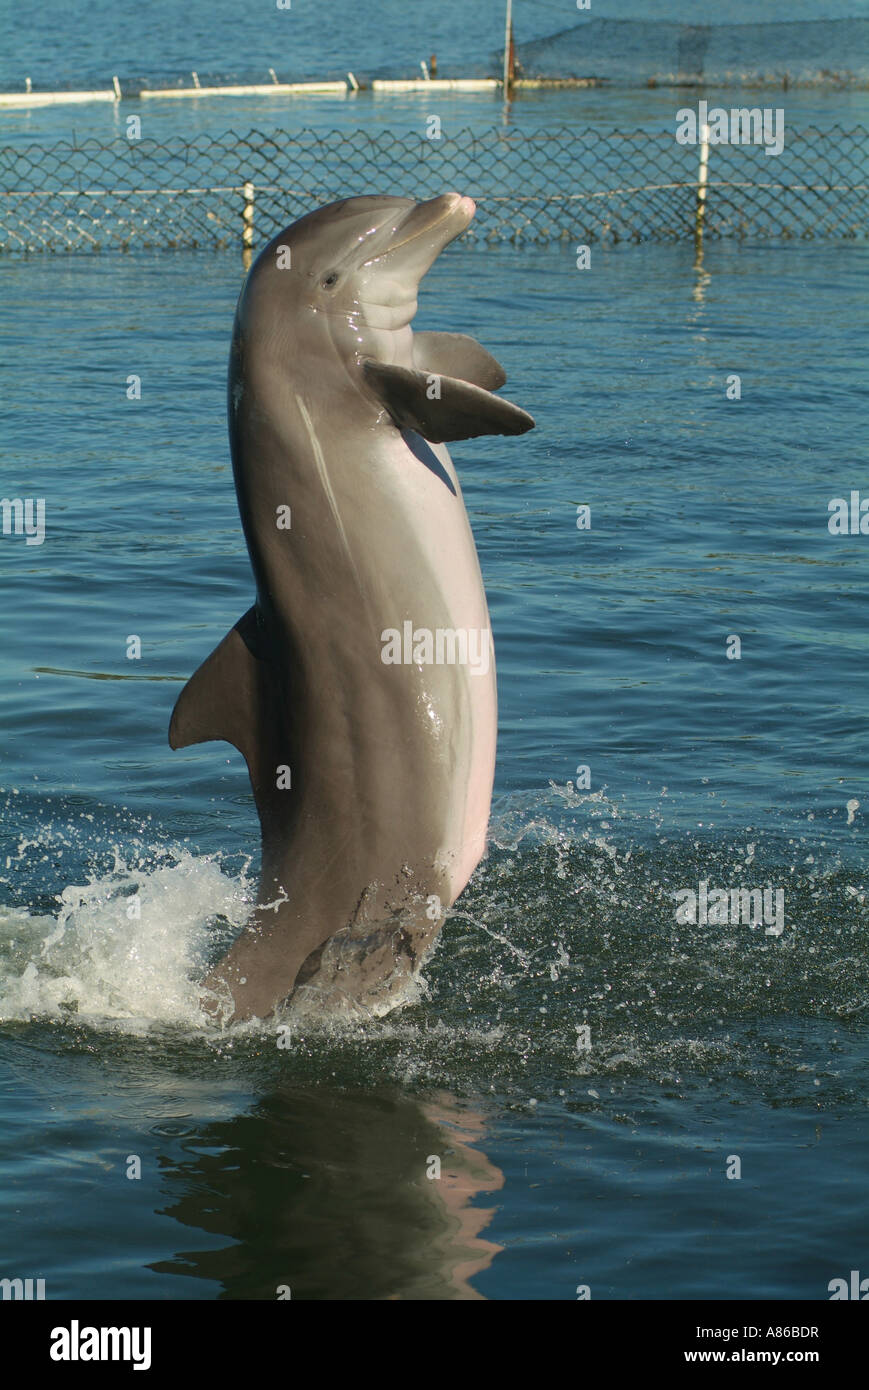 A dolphin plays in a captive environment at the Dolphin Research Center at Grassy Key Stock Photo